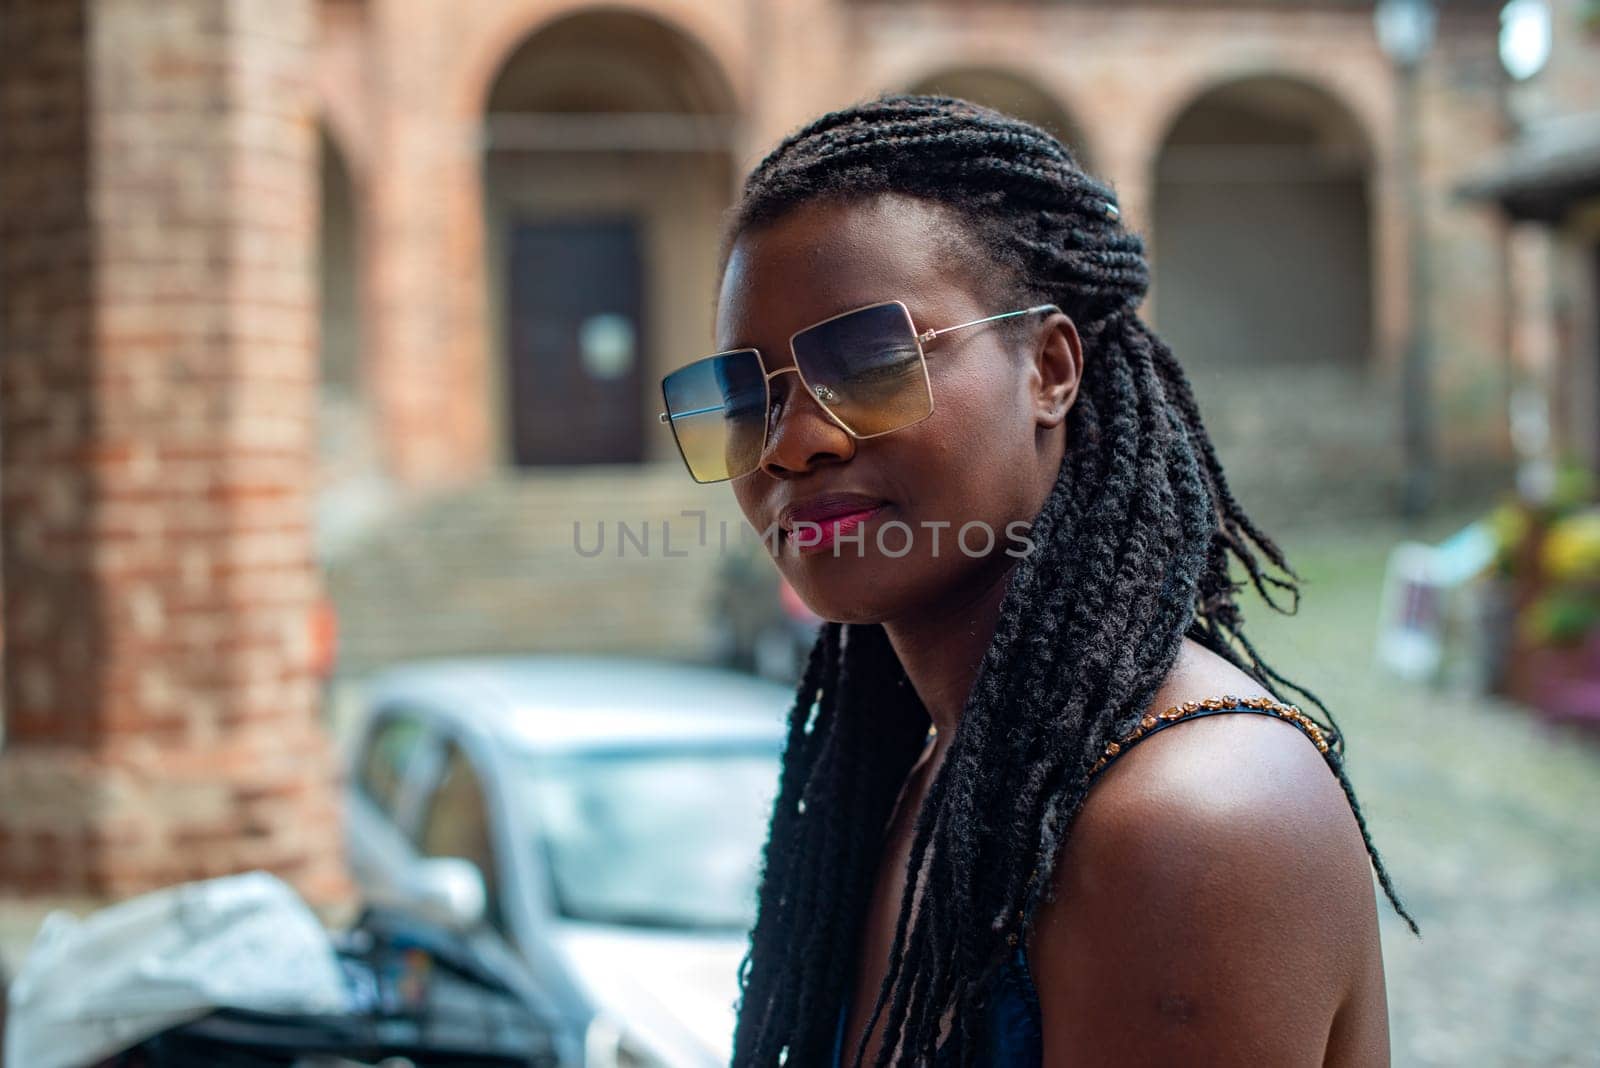 Happy young woman feeling confident in her style. Fashionable woman wearing sunglasses and braided hairstyle outdoors. Tourist traveling italian old village.